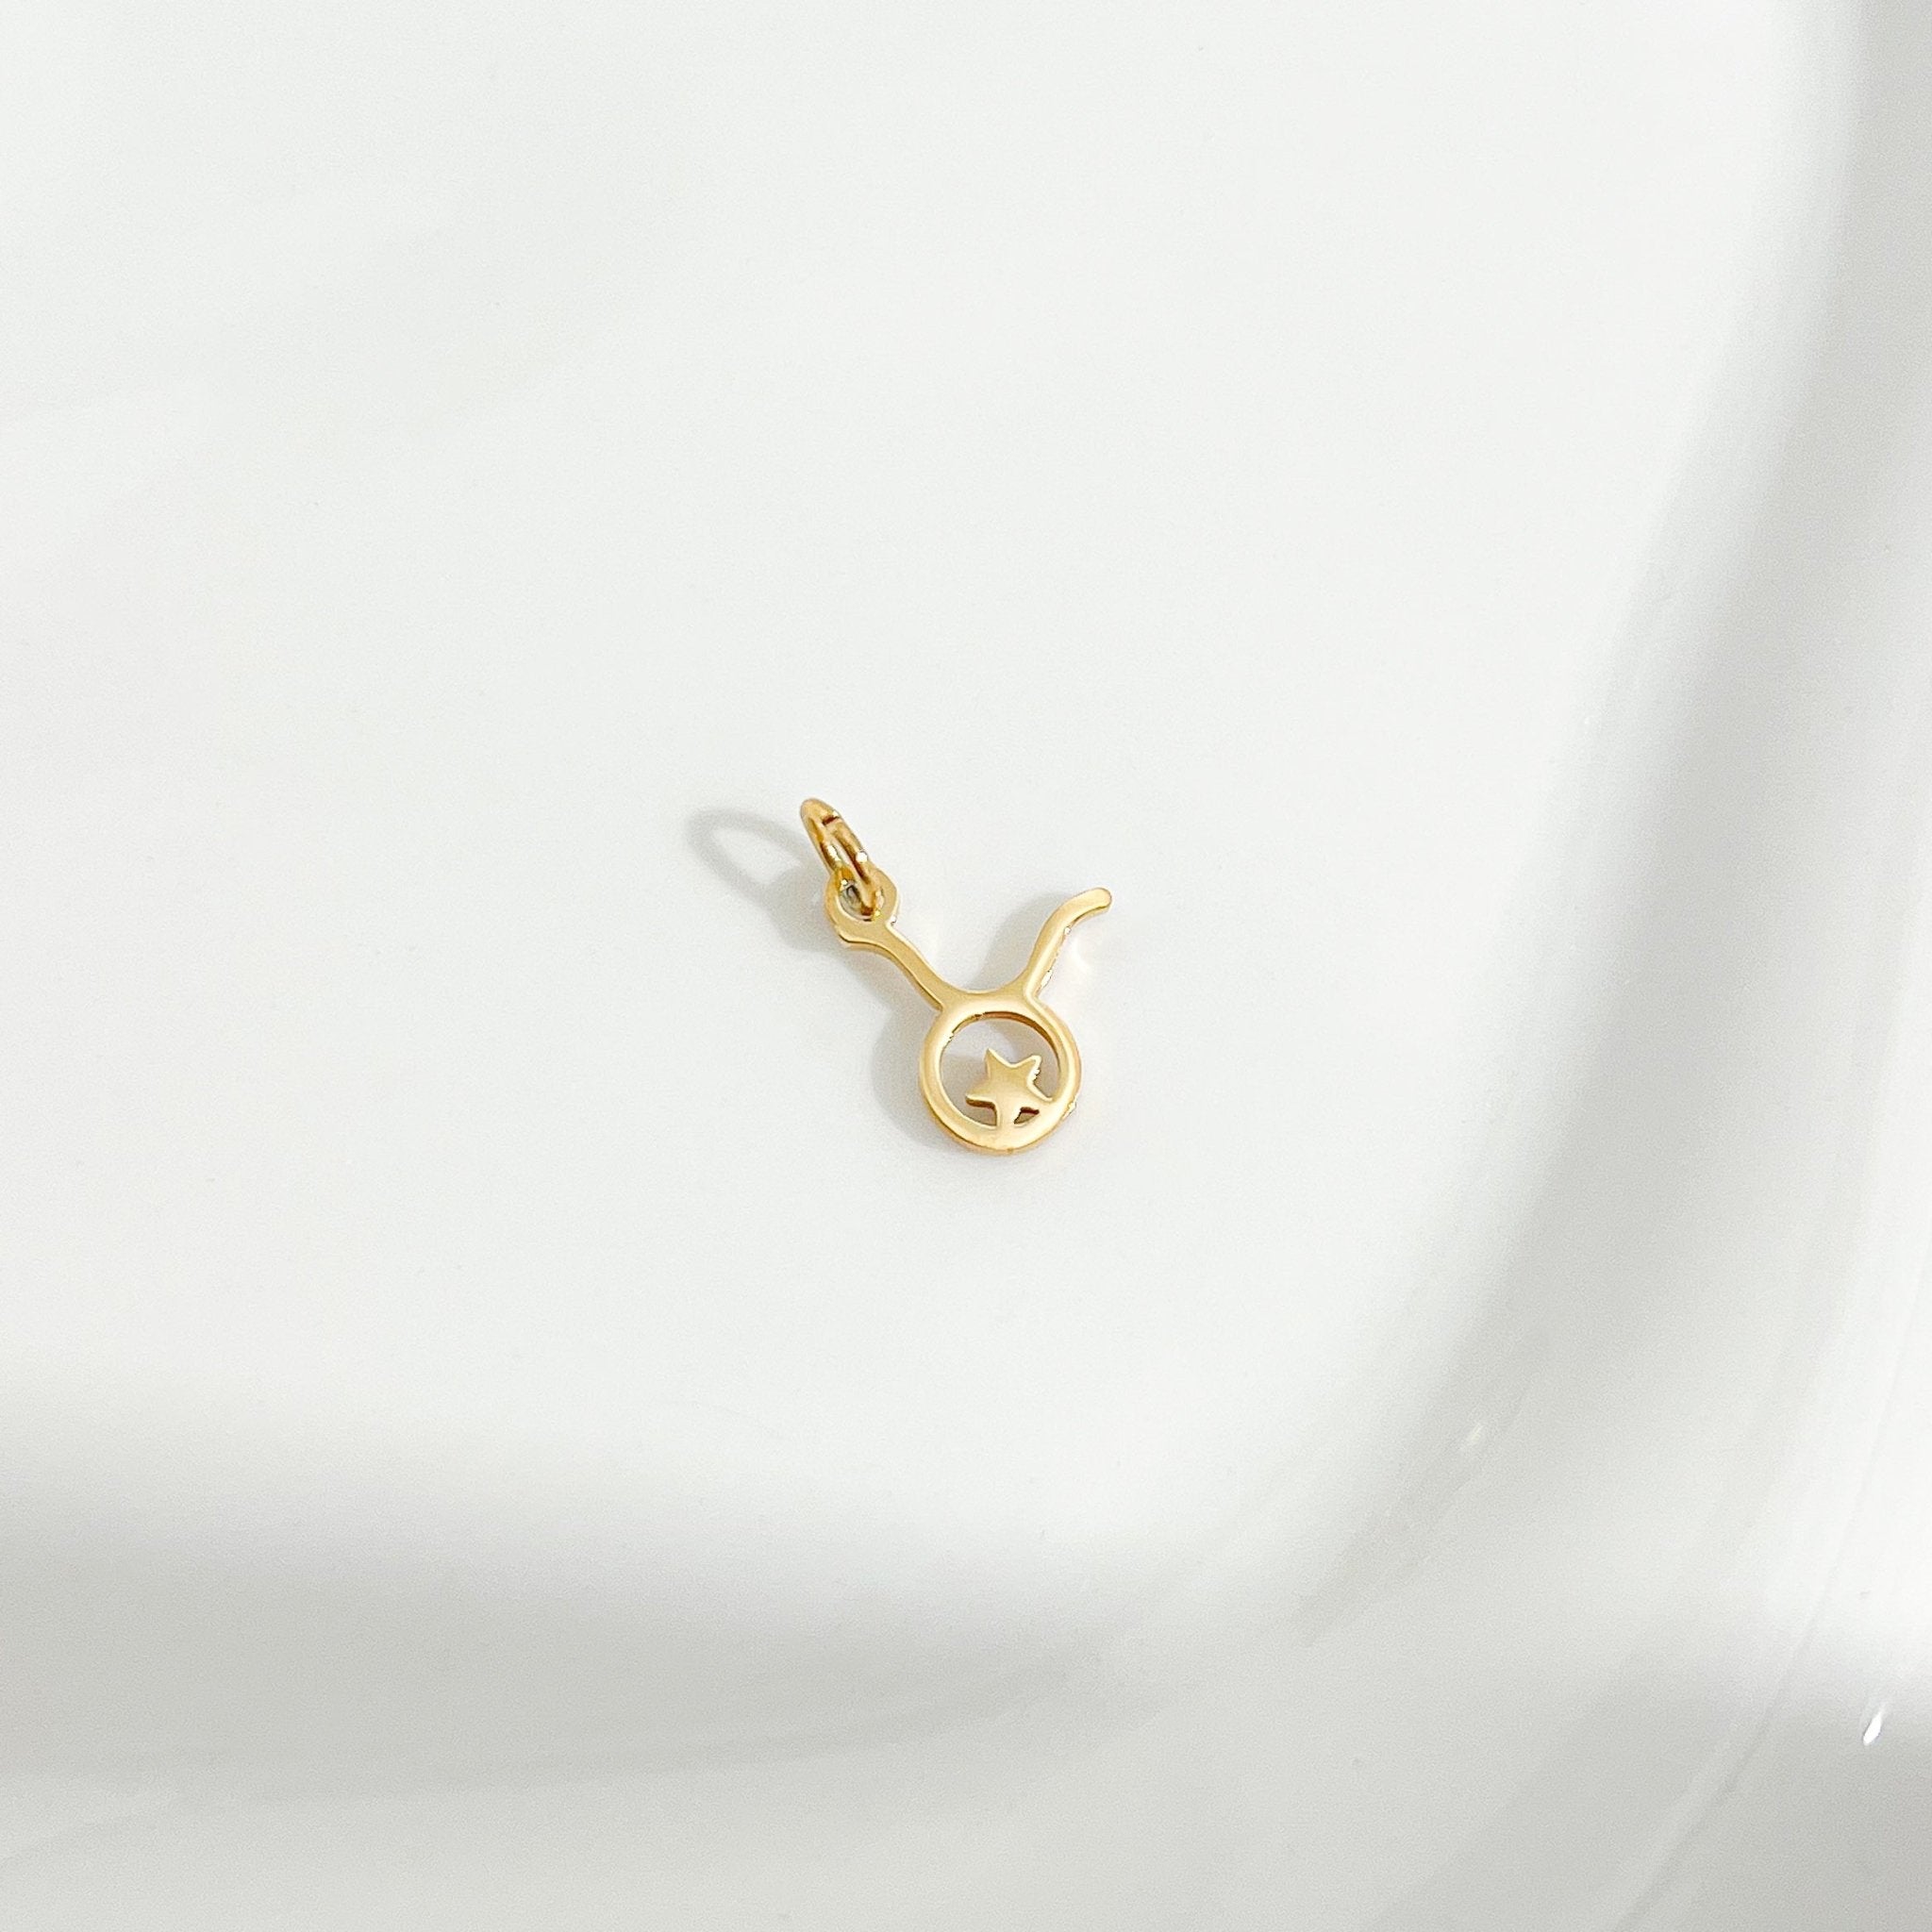 Dainty Zodiac Gold Necklace - Flaire & Co.